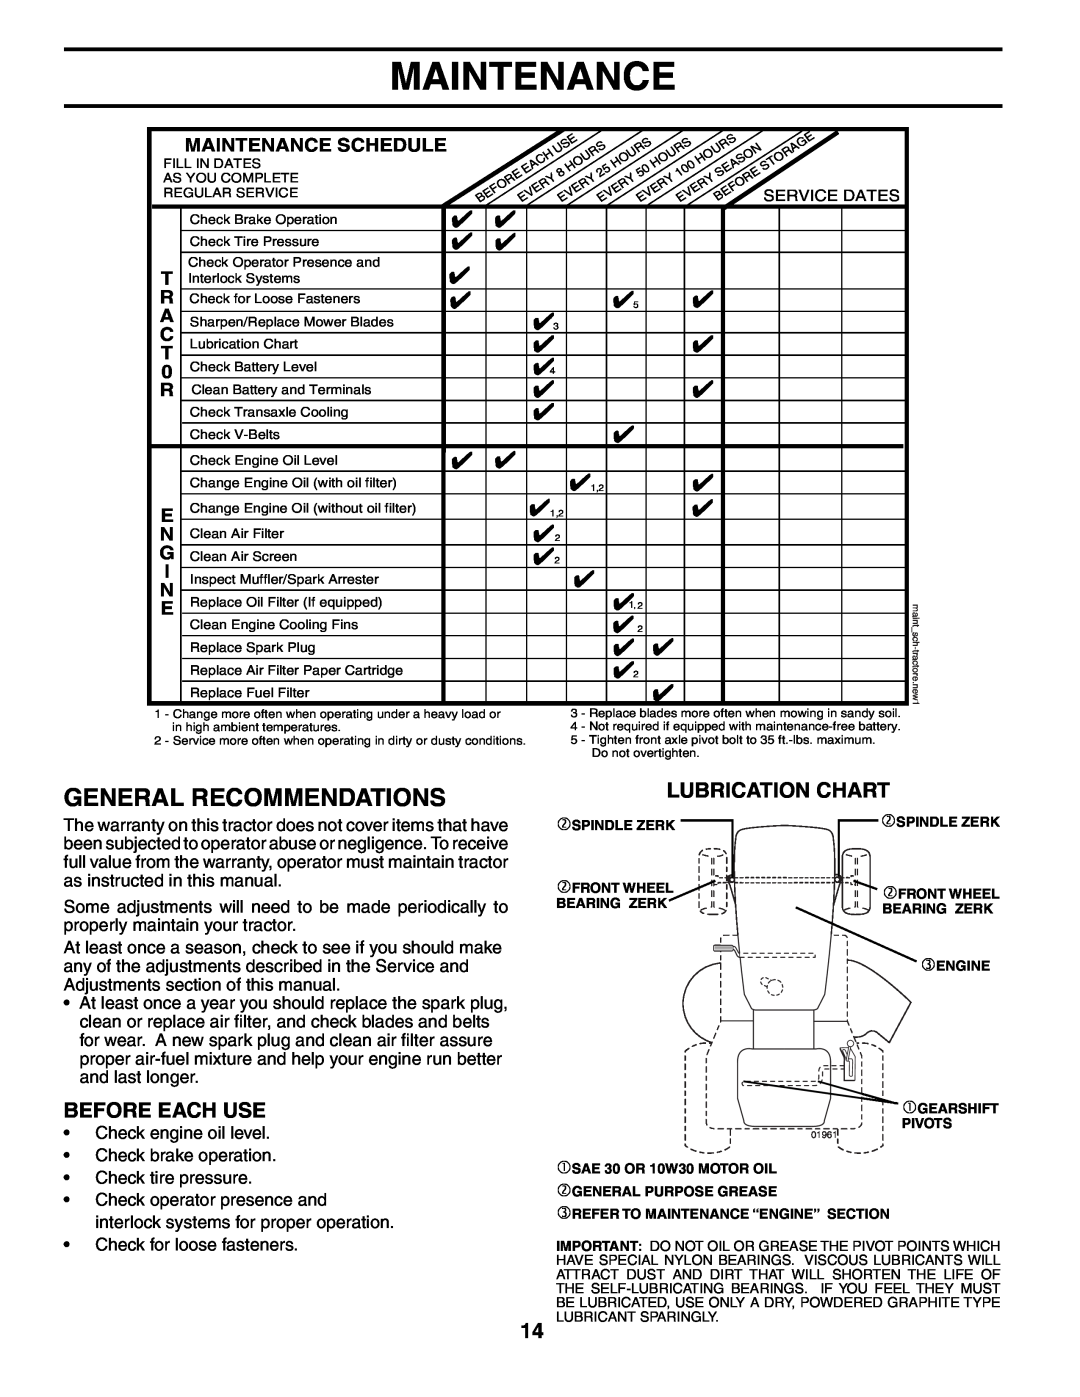 Poulan PO17542STC manual General Recommendations, Before Each Use, Lubrication Chart, Maintenance Schedule 